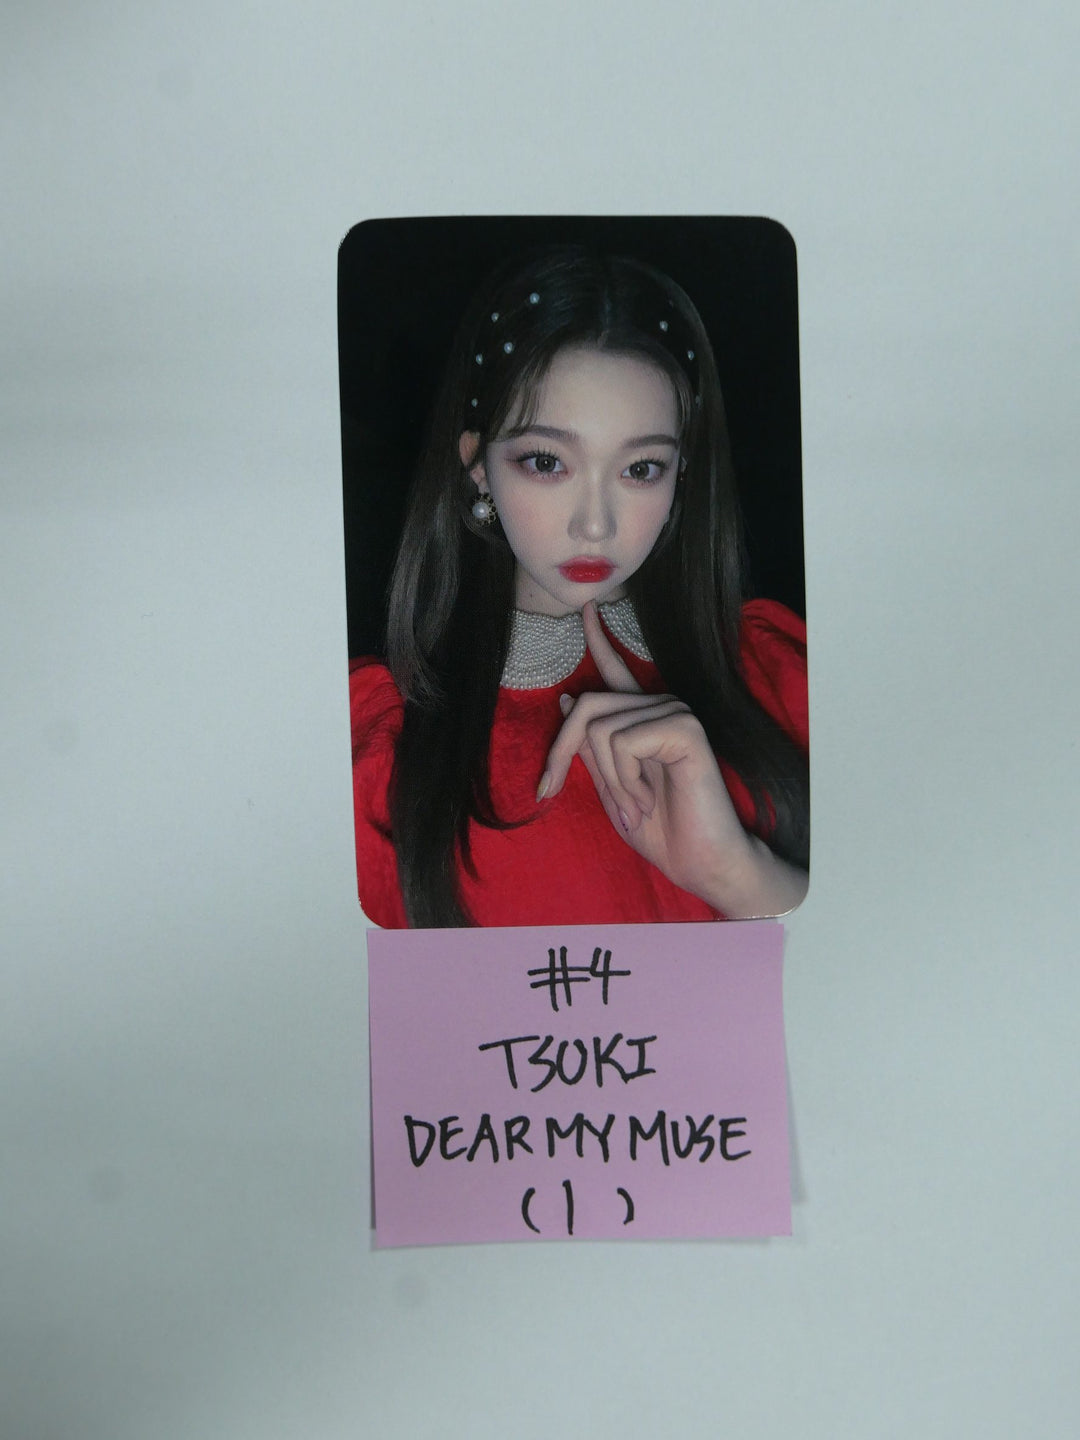 Billlie 'the collective soul and unconscious: chapter one' - Dear My Muse Fansign Event Photocard